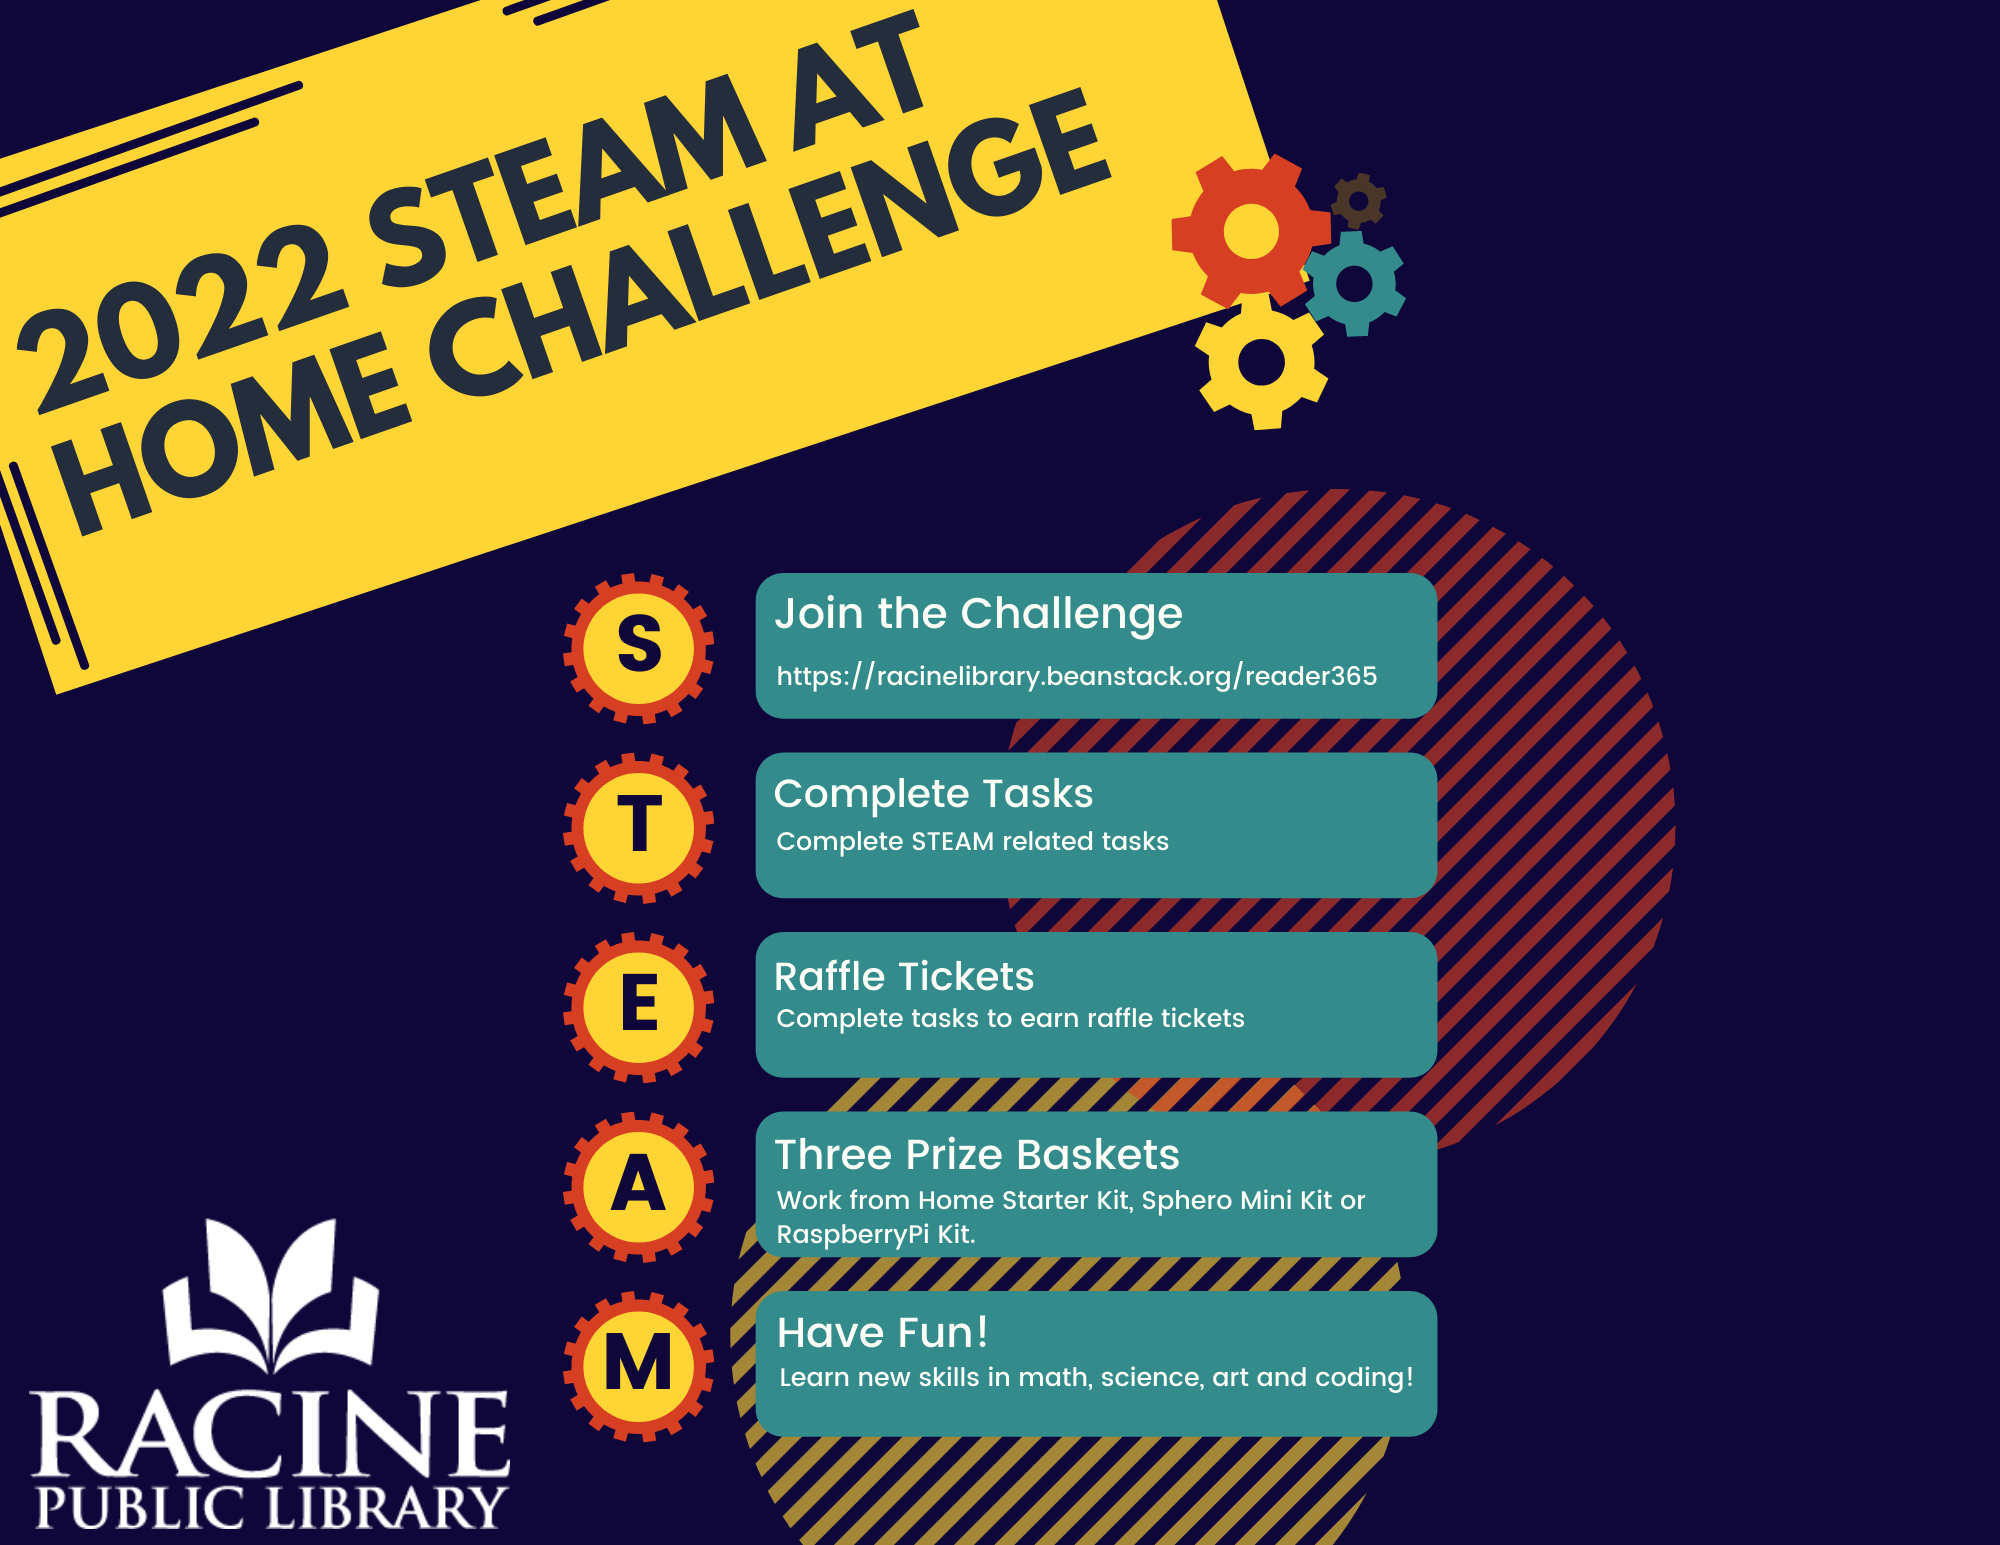 2022 STEAM at Home Challenge. Join the Challenge: RacineLibrary.BeanStack.org/reader365. Complete STEAM related tasks. Complete tasks to earn raffle tickets. Three Prize Baskets: Work from home starter kit, Sphere Mini kit or Raspberry Pi kit. Have fun! Learn new skills in math, science, art and coding!